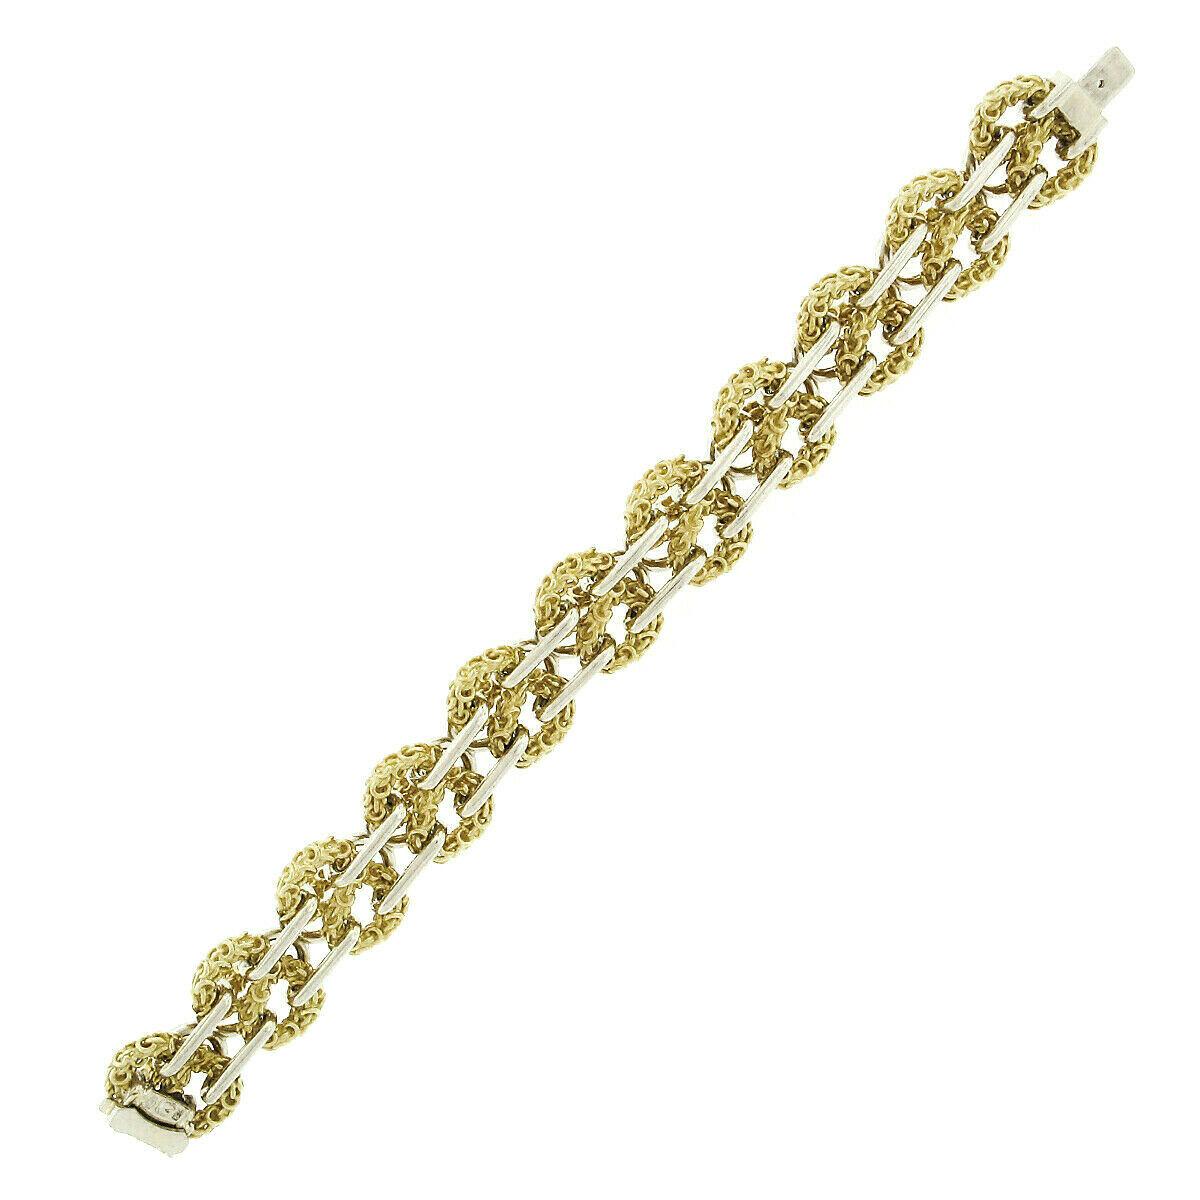 Heavy 18 Karat Yellow and White Gold Wide 3D Infinity Knot Chain Bracelet For Sale 4